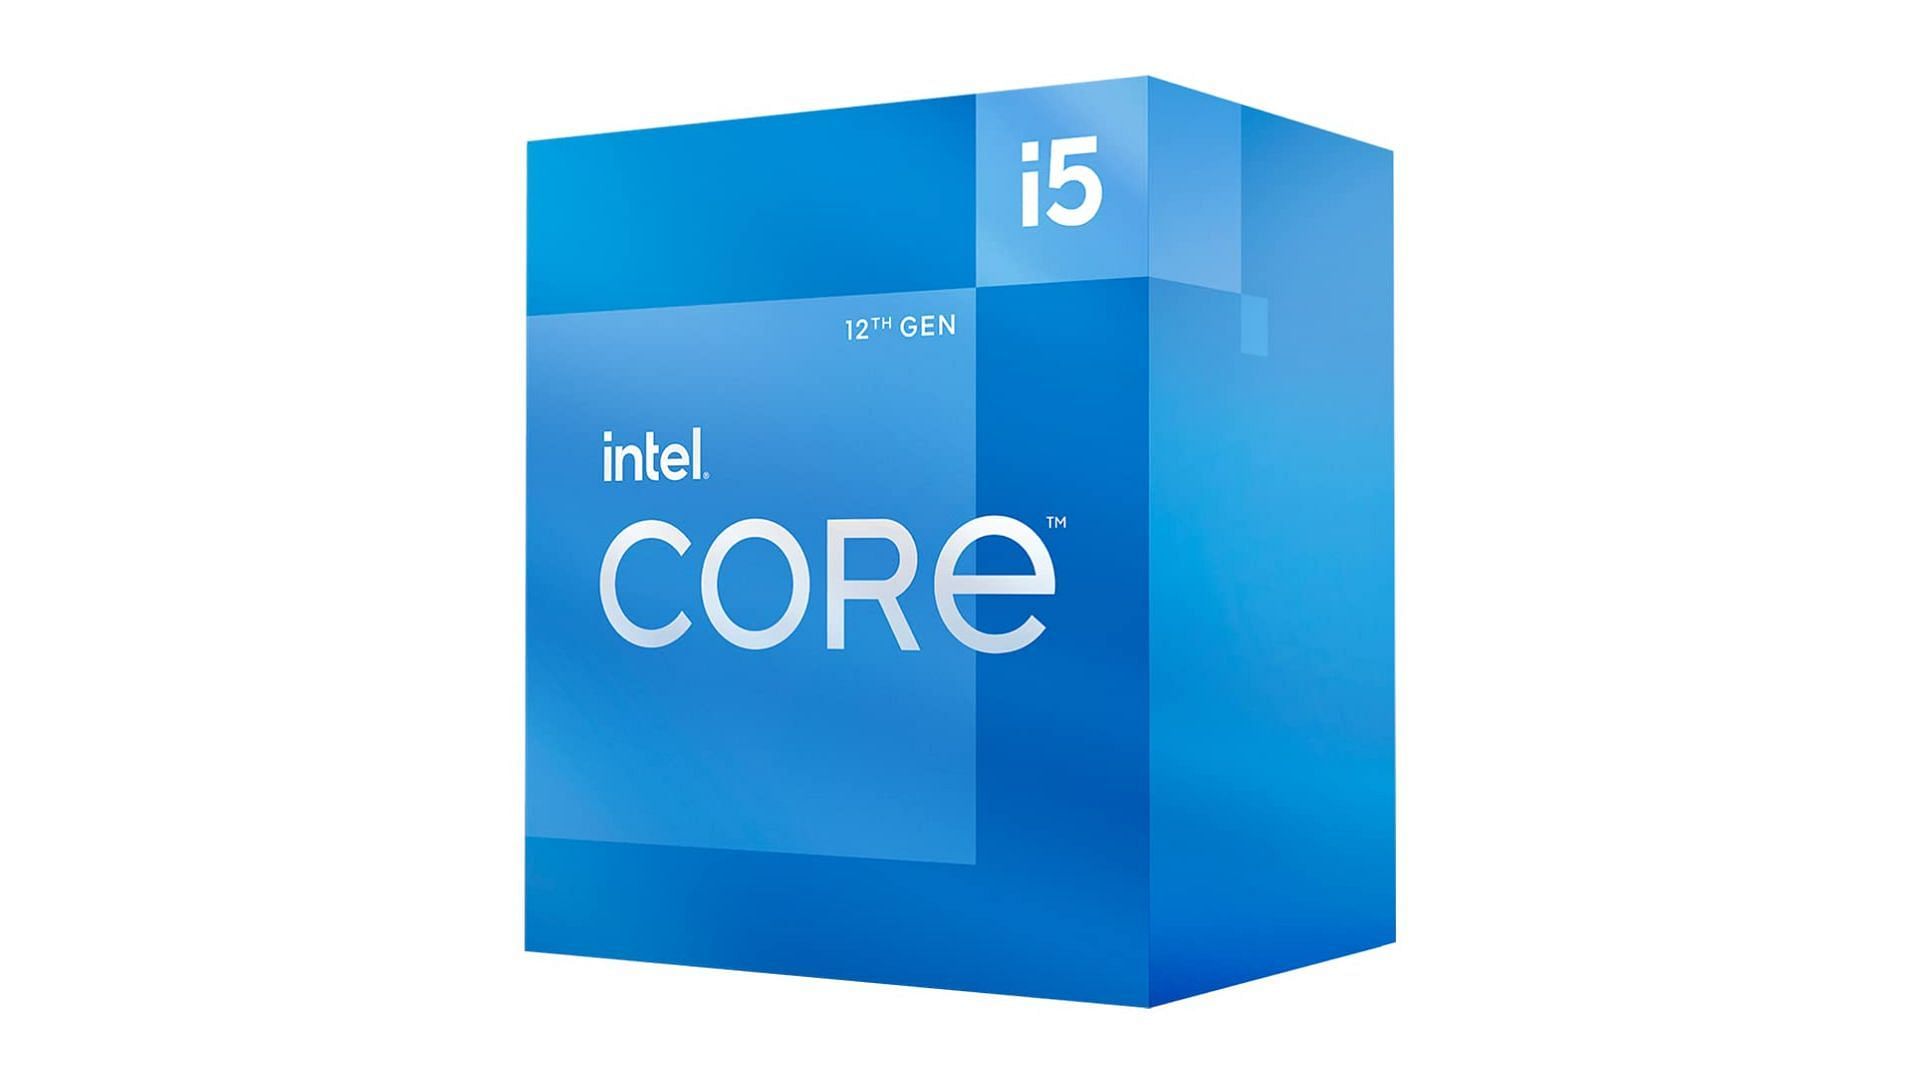 The Intel Core i5 12400 is among the best budget CPUs available (Image via Intel)